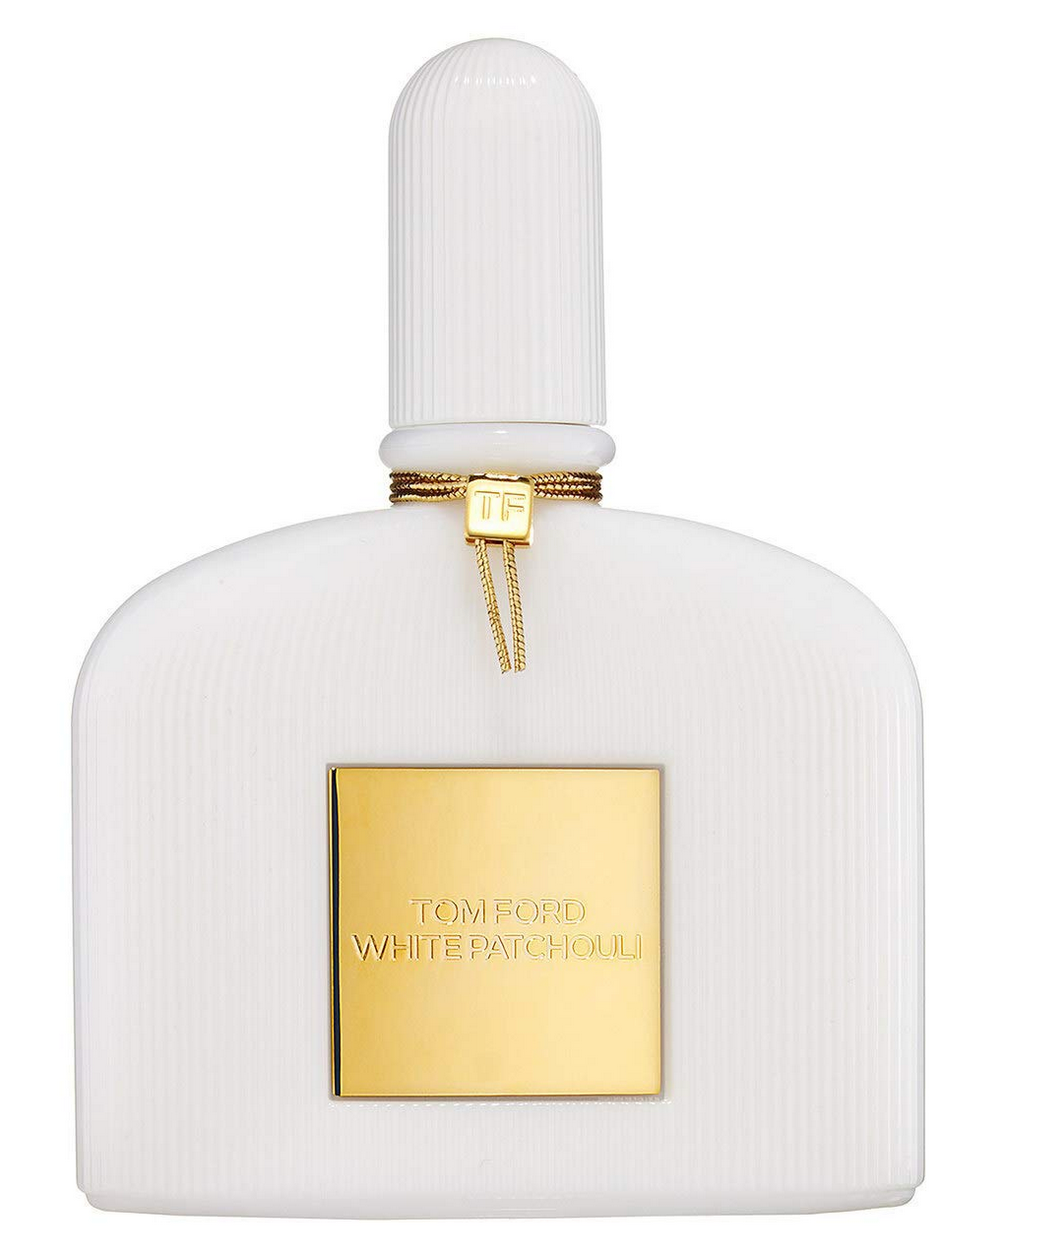 Tom Ford White Patchouli (EDP) Sample